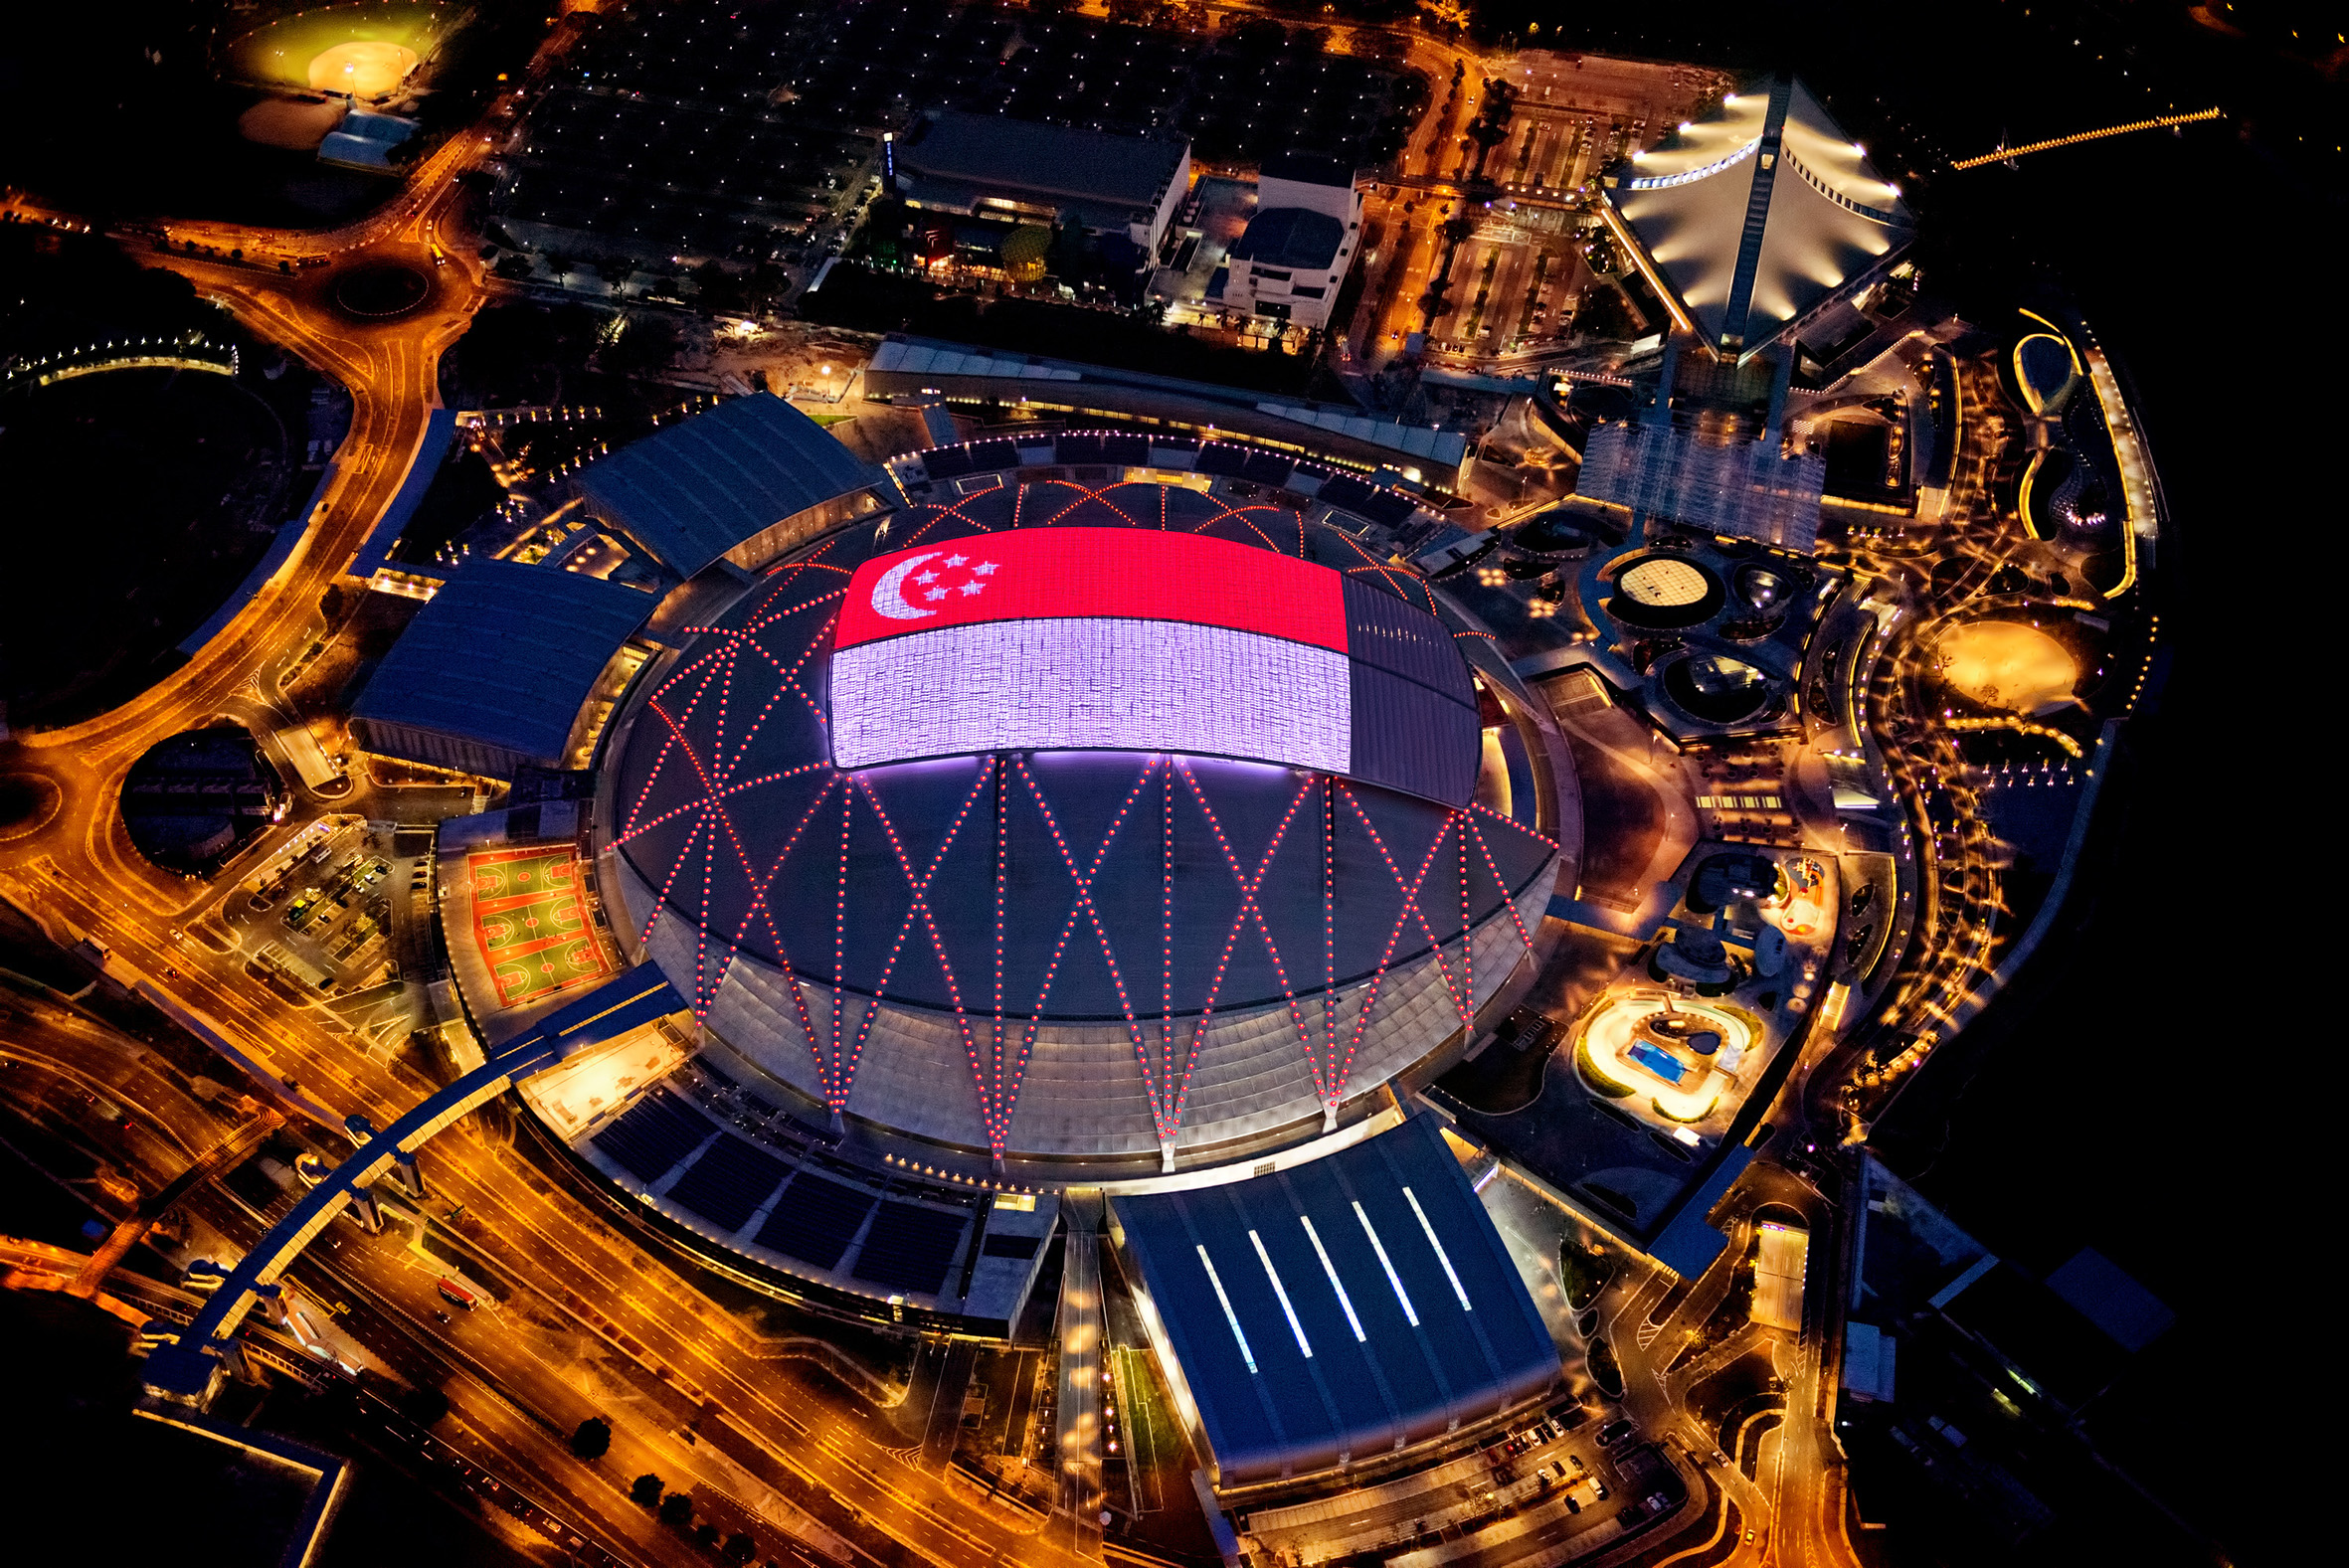 stadium in Singapore seen from above